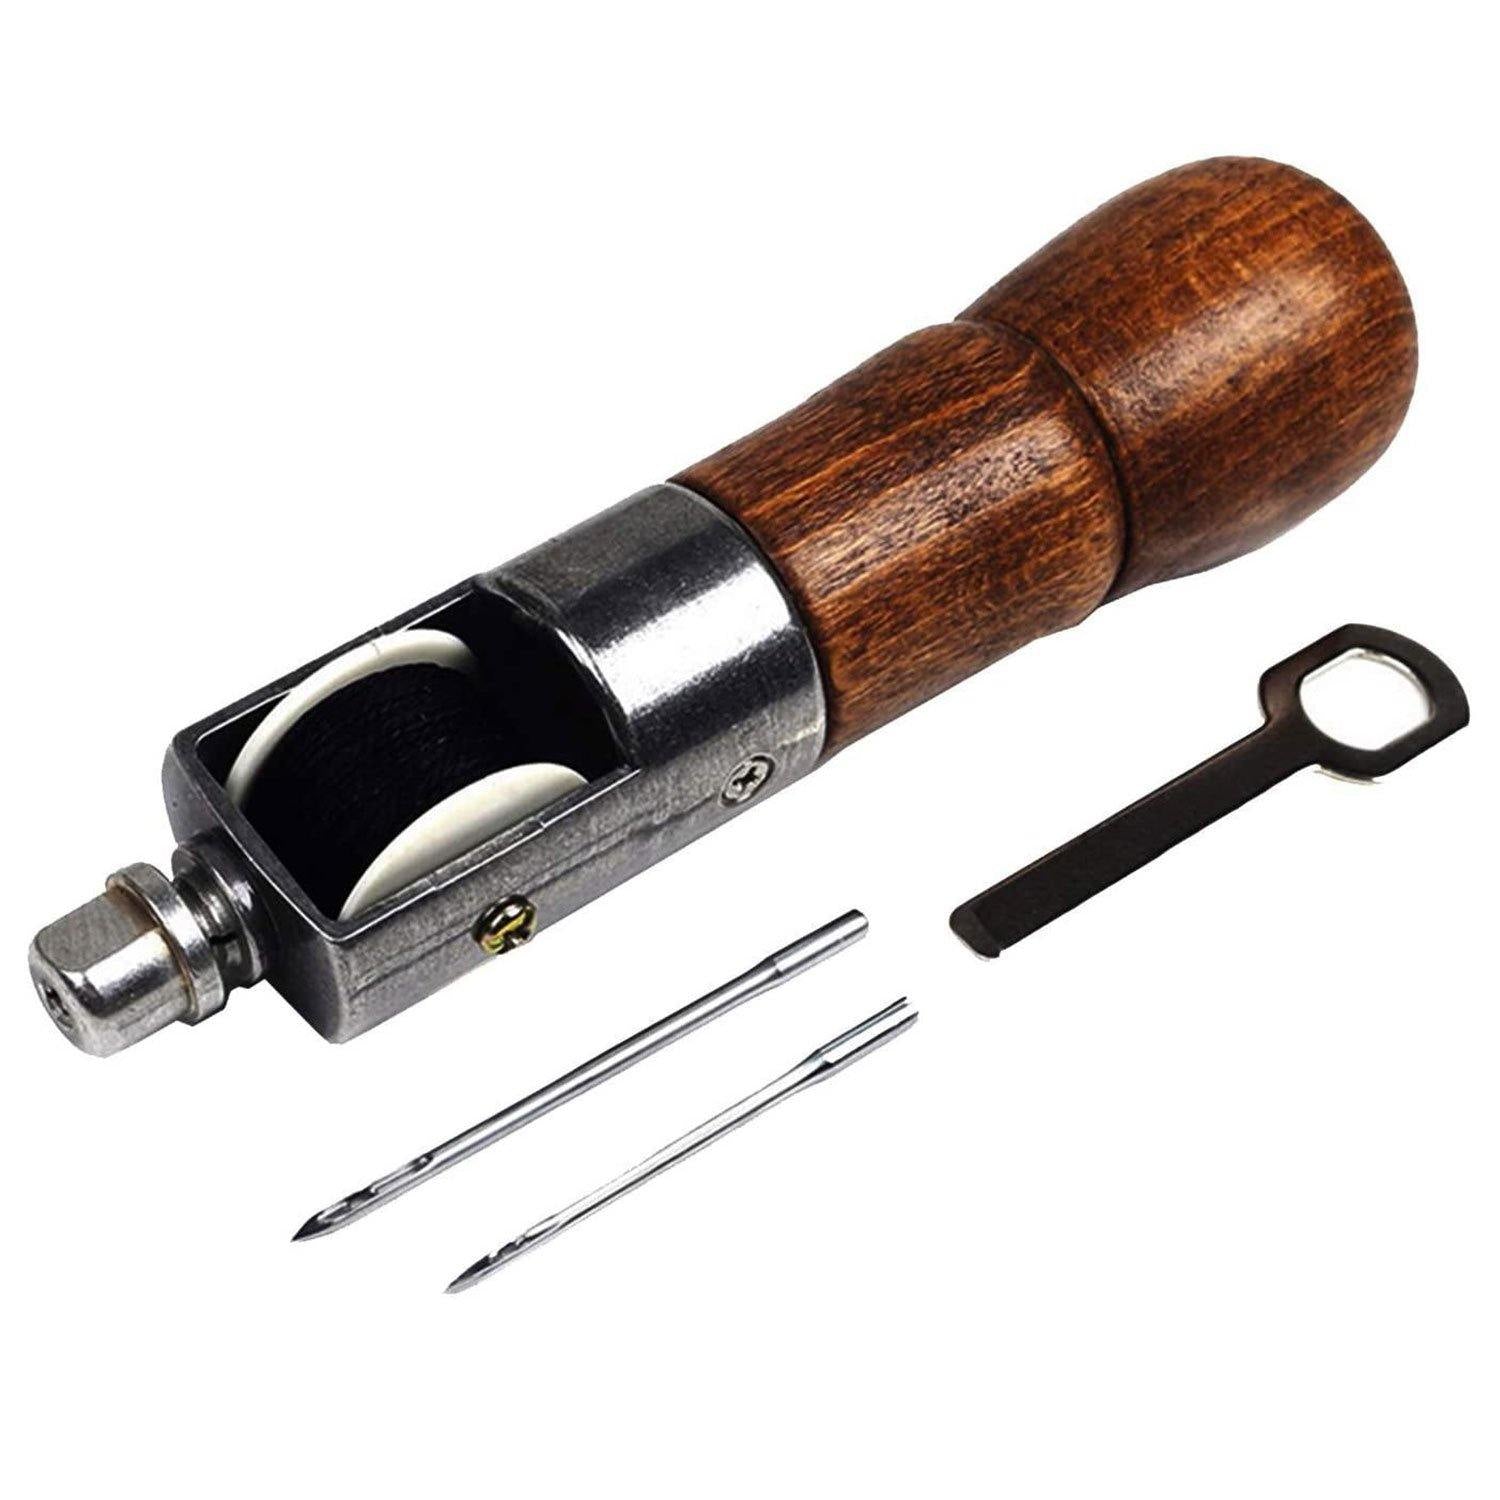 Leather Awl - How It's One of the Most Handy Leather Tools